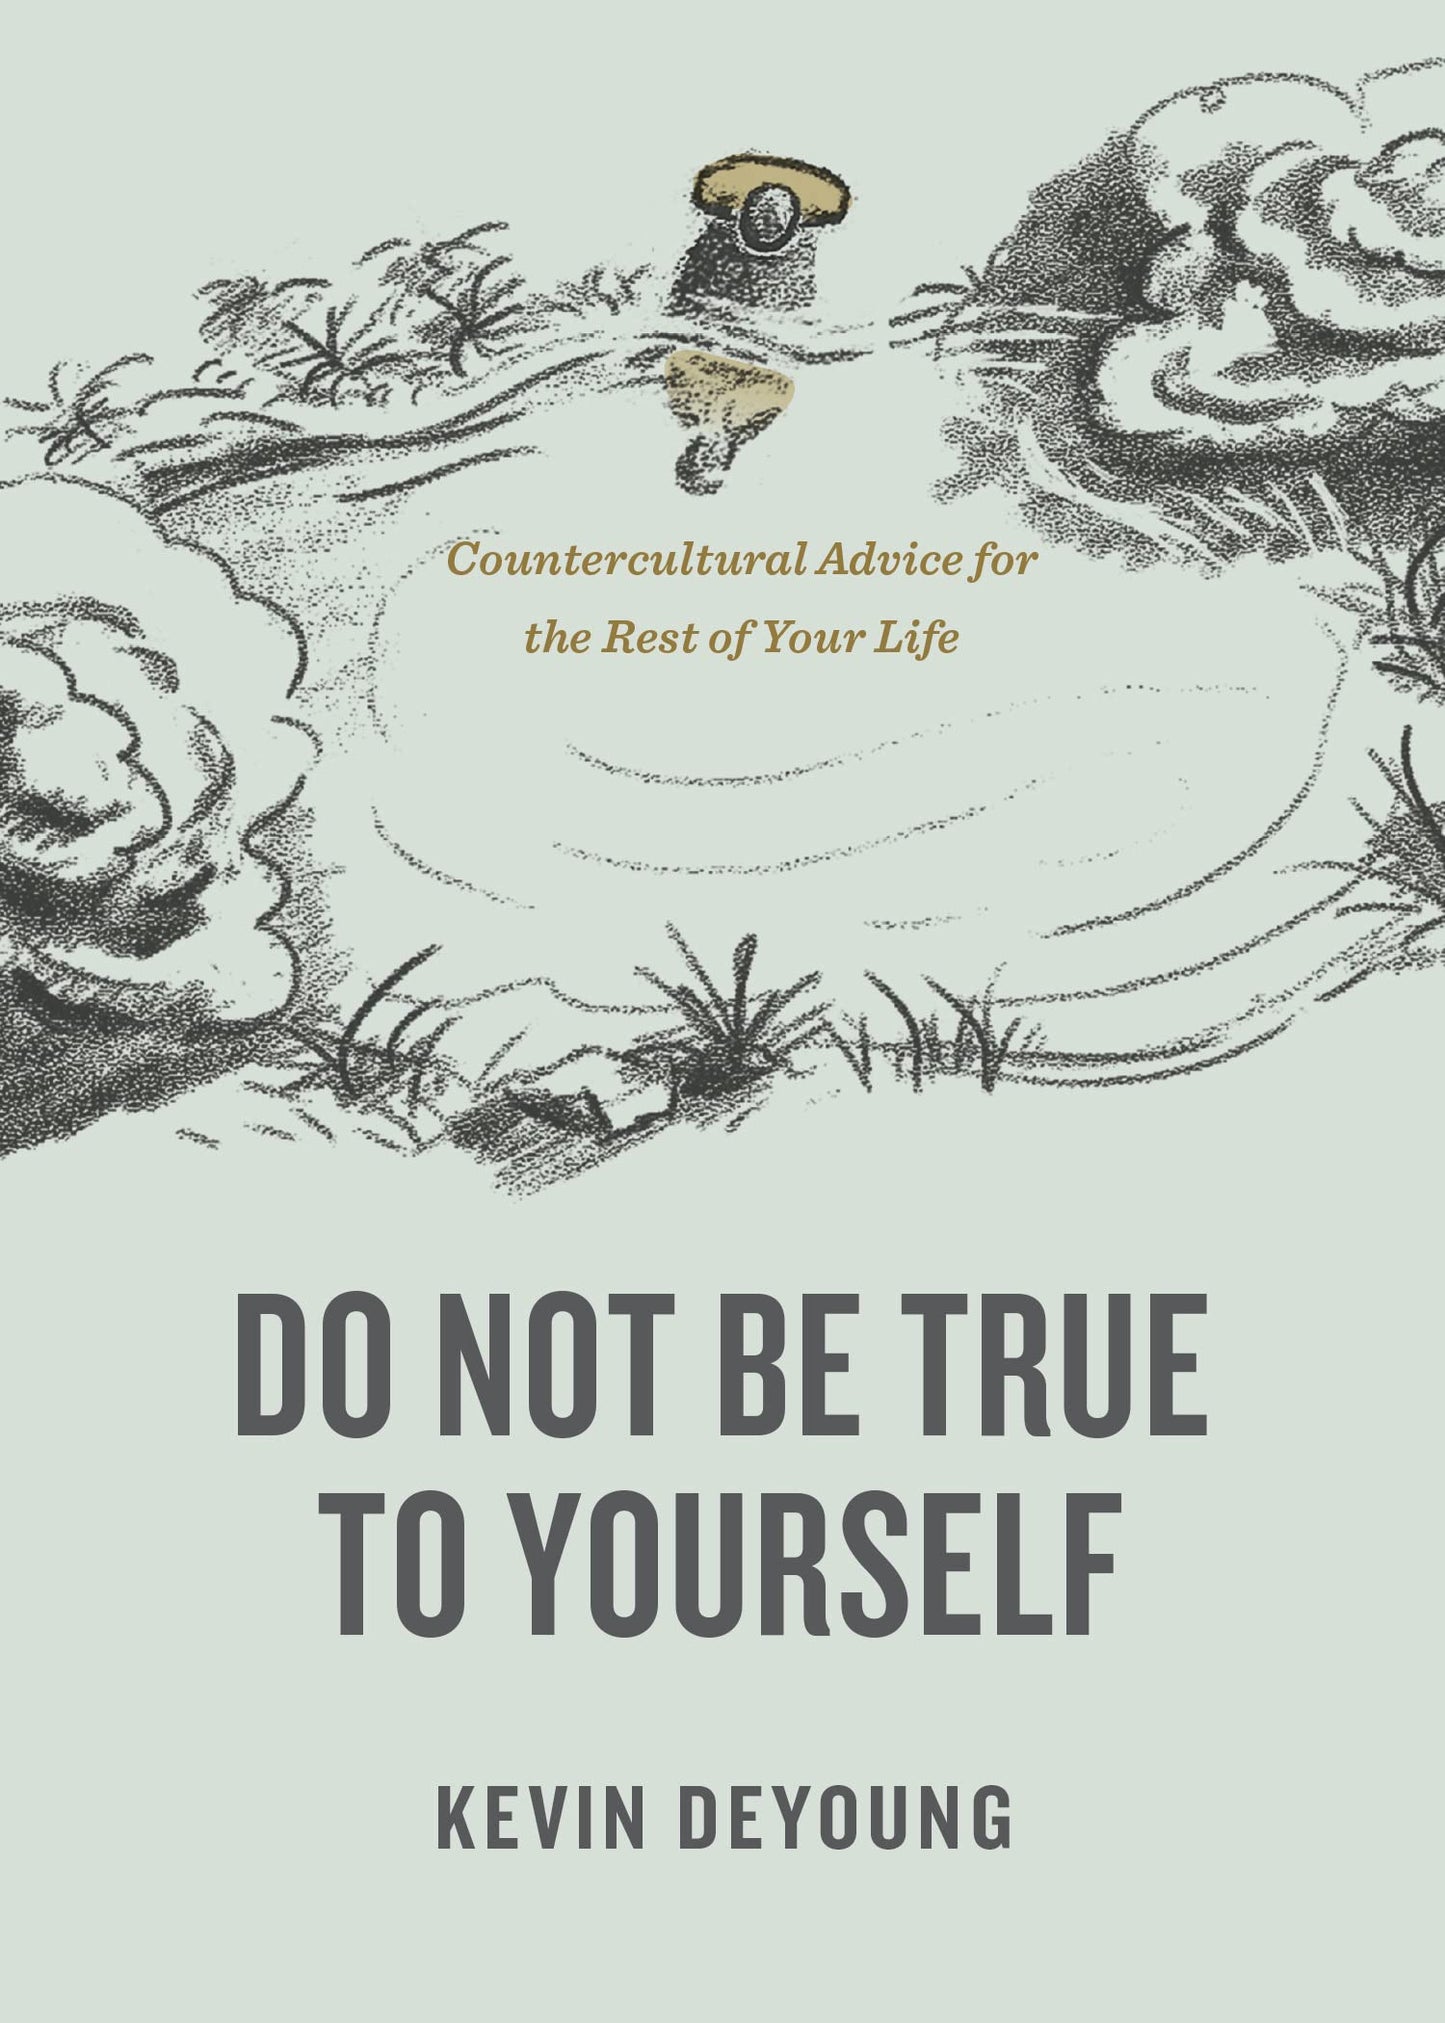 Do Not Be True to Yourself (DeYoung)